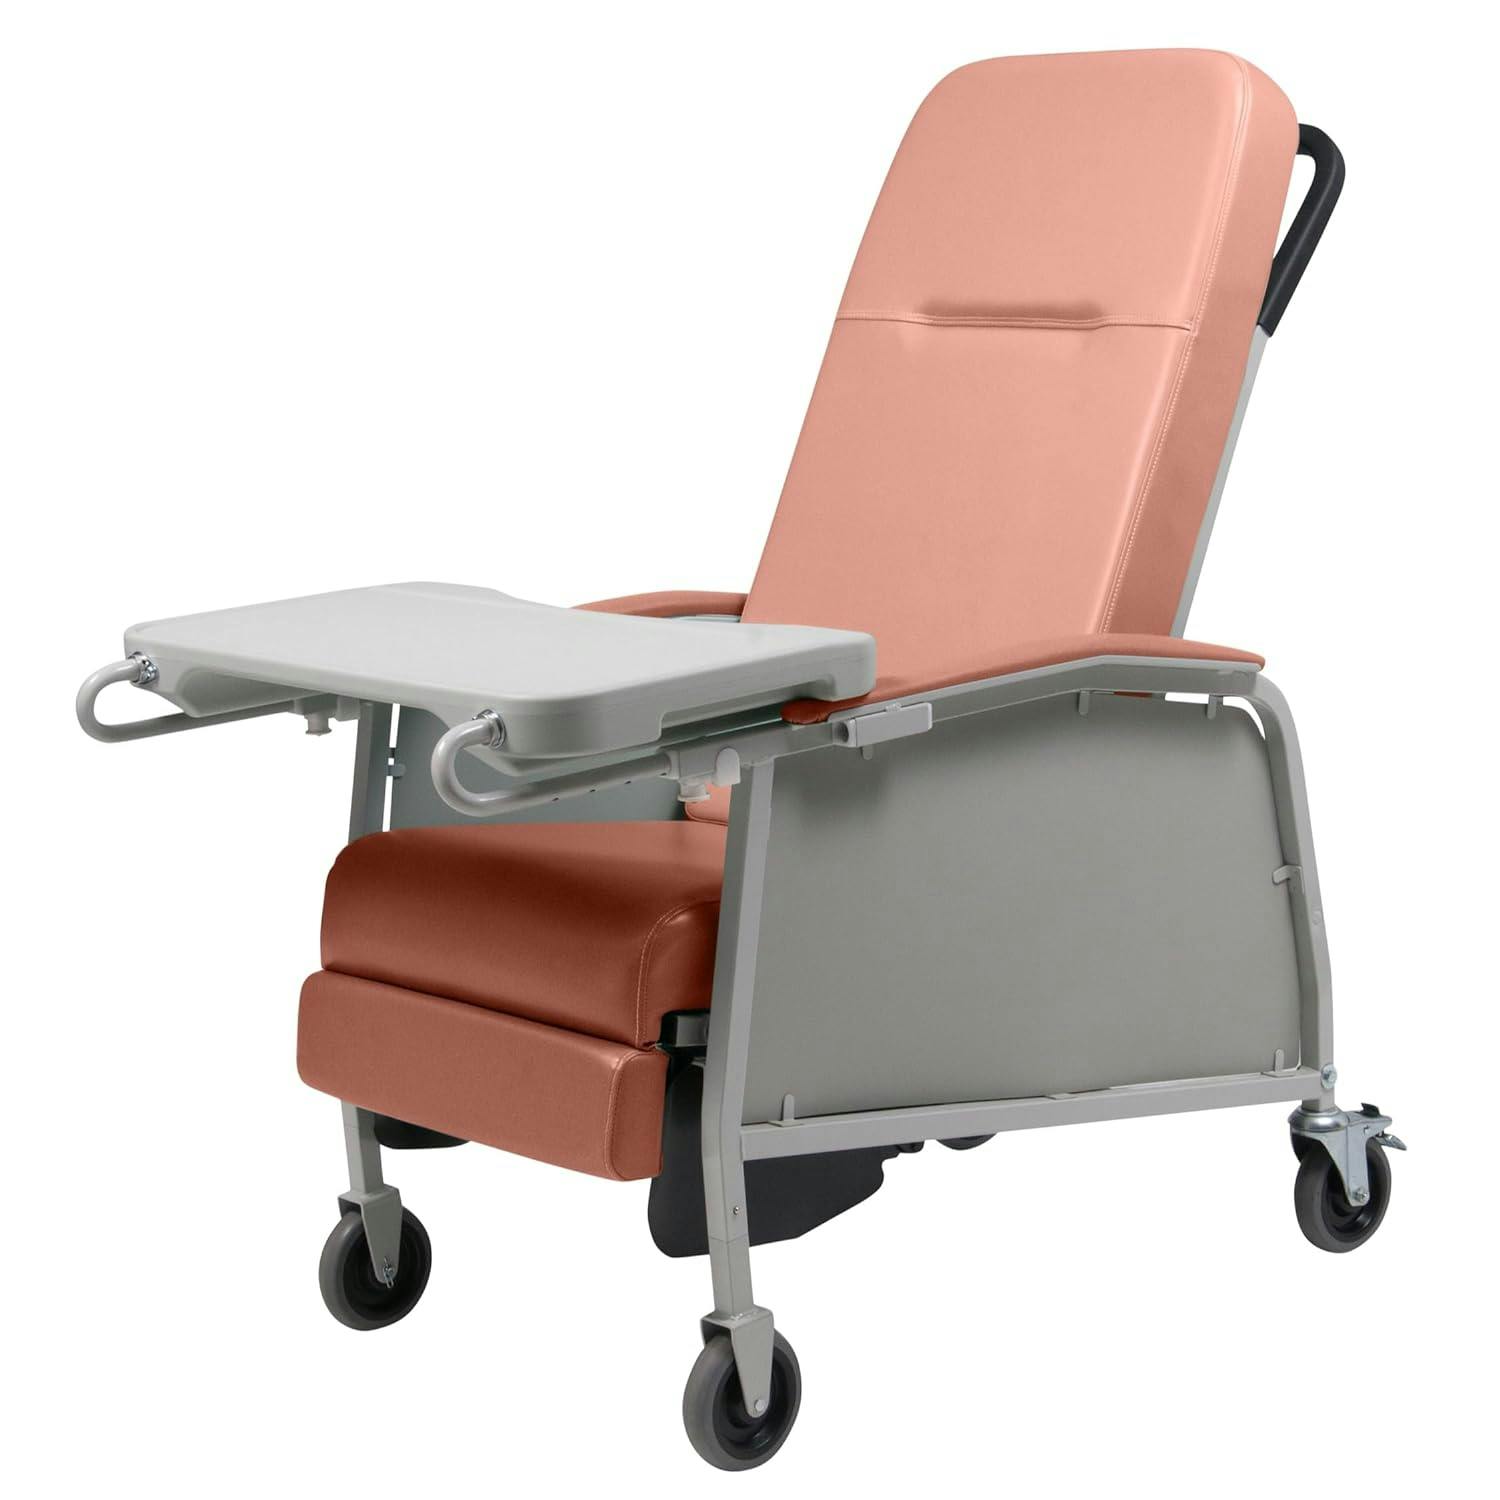 Rosewood Alloy Steel 3-Position Medical Recliner with Wheel Lock